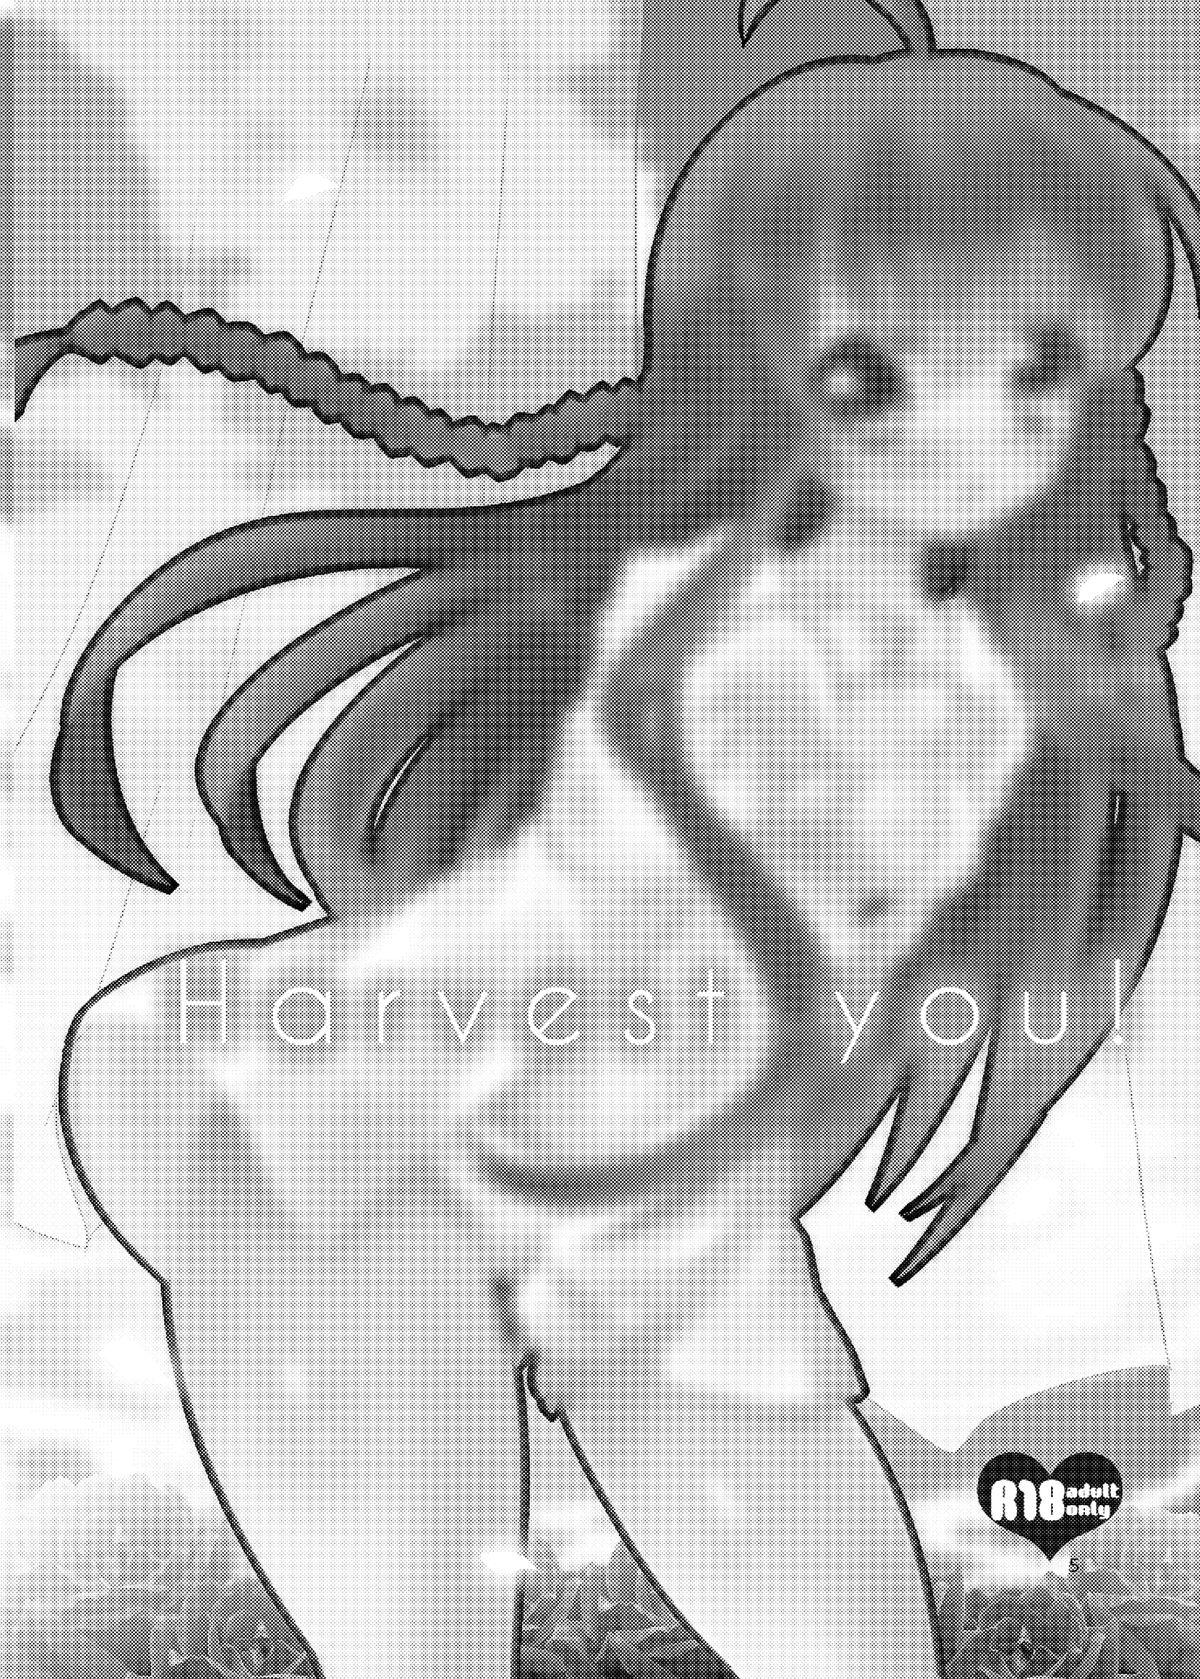 Amadora Harvest you! - Rewrite Soapy - Page 4